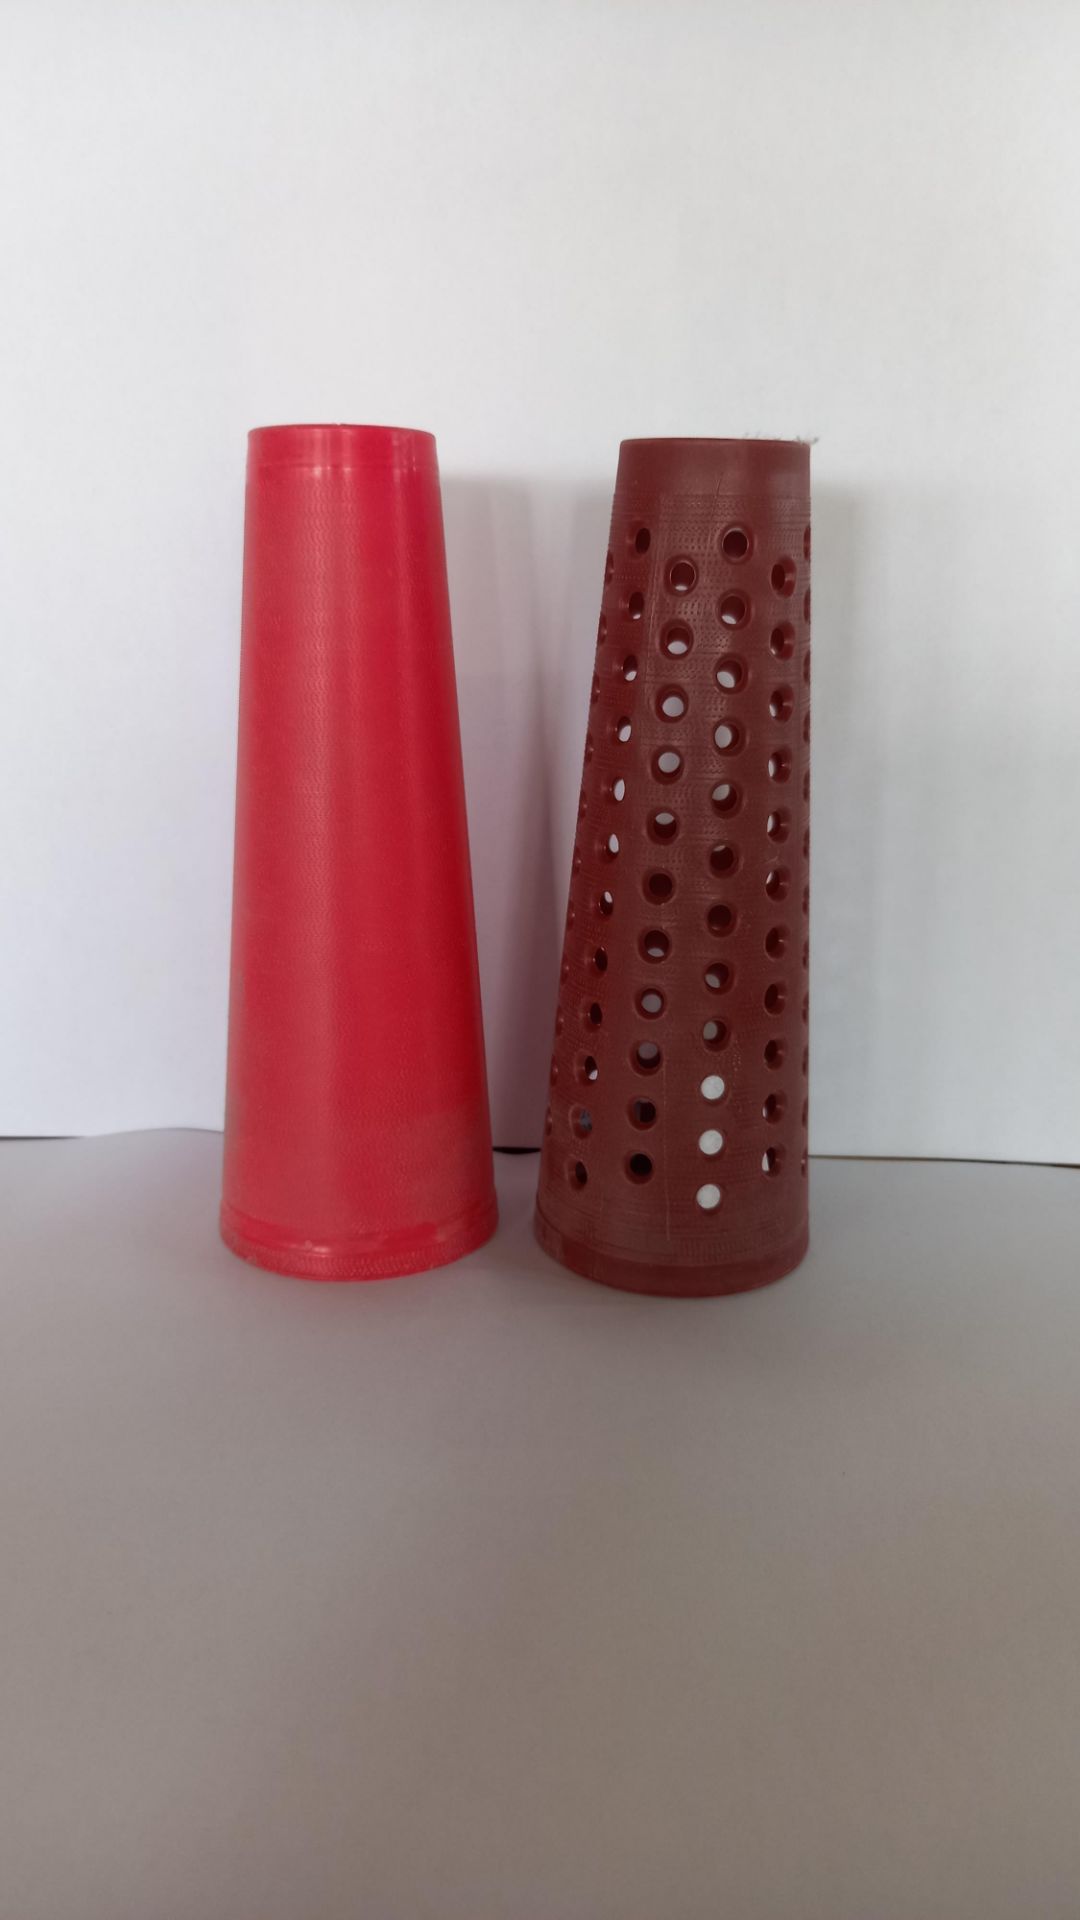 Pallet of 6" Traverse mixed plastic cones 2.5" base to 1.25" - Image 2 of 2